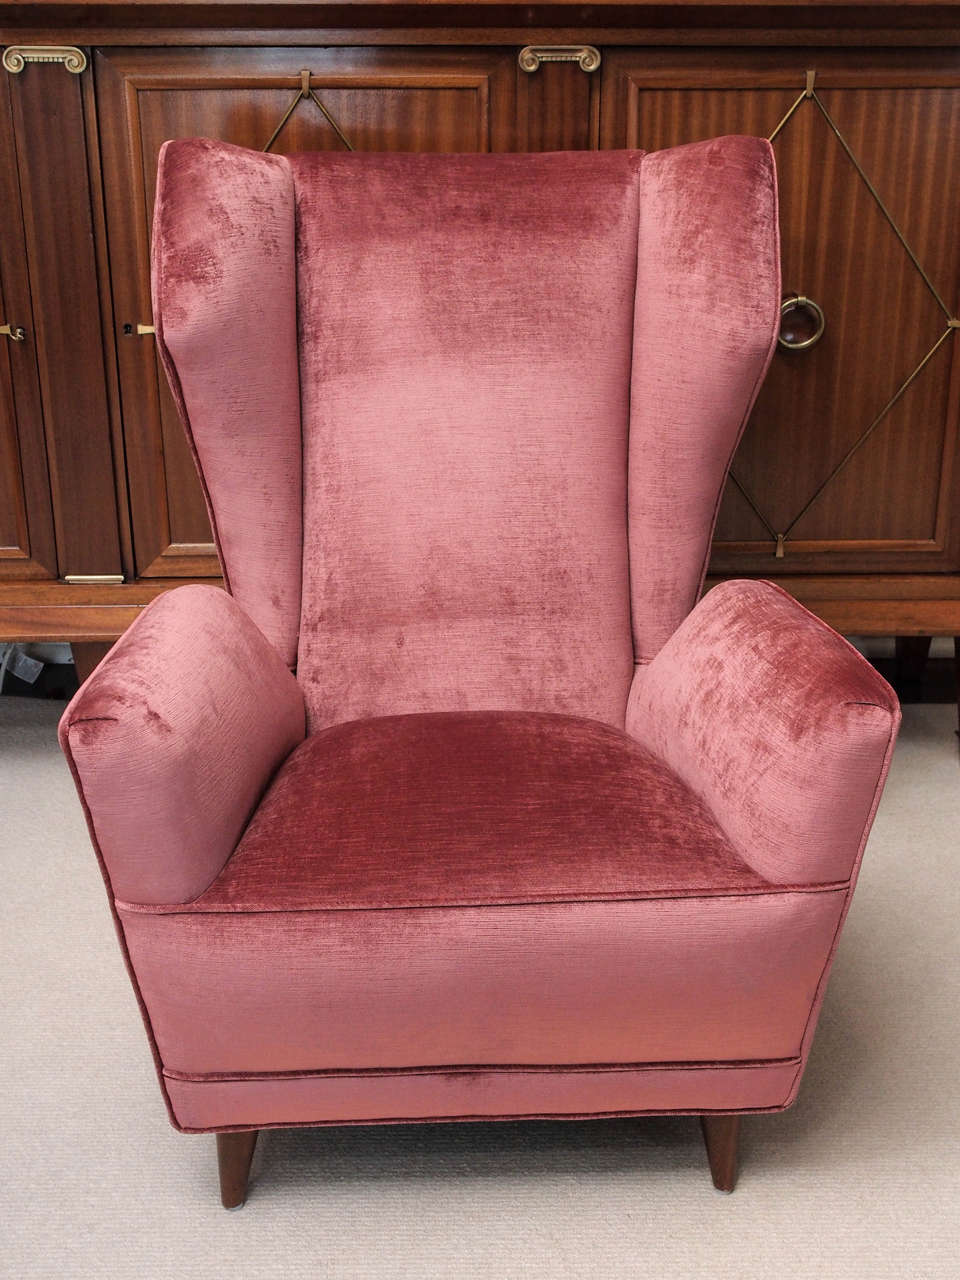 Pair of stylish Italian lounge chairs upholstered in rose pink velvet; the curving back of modified 